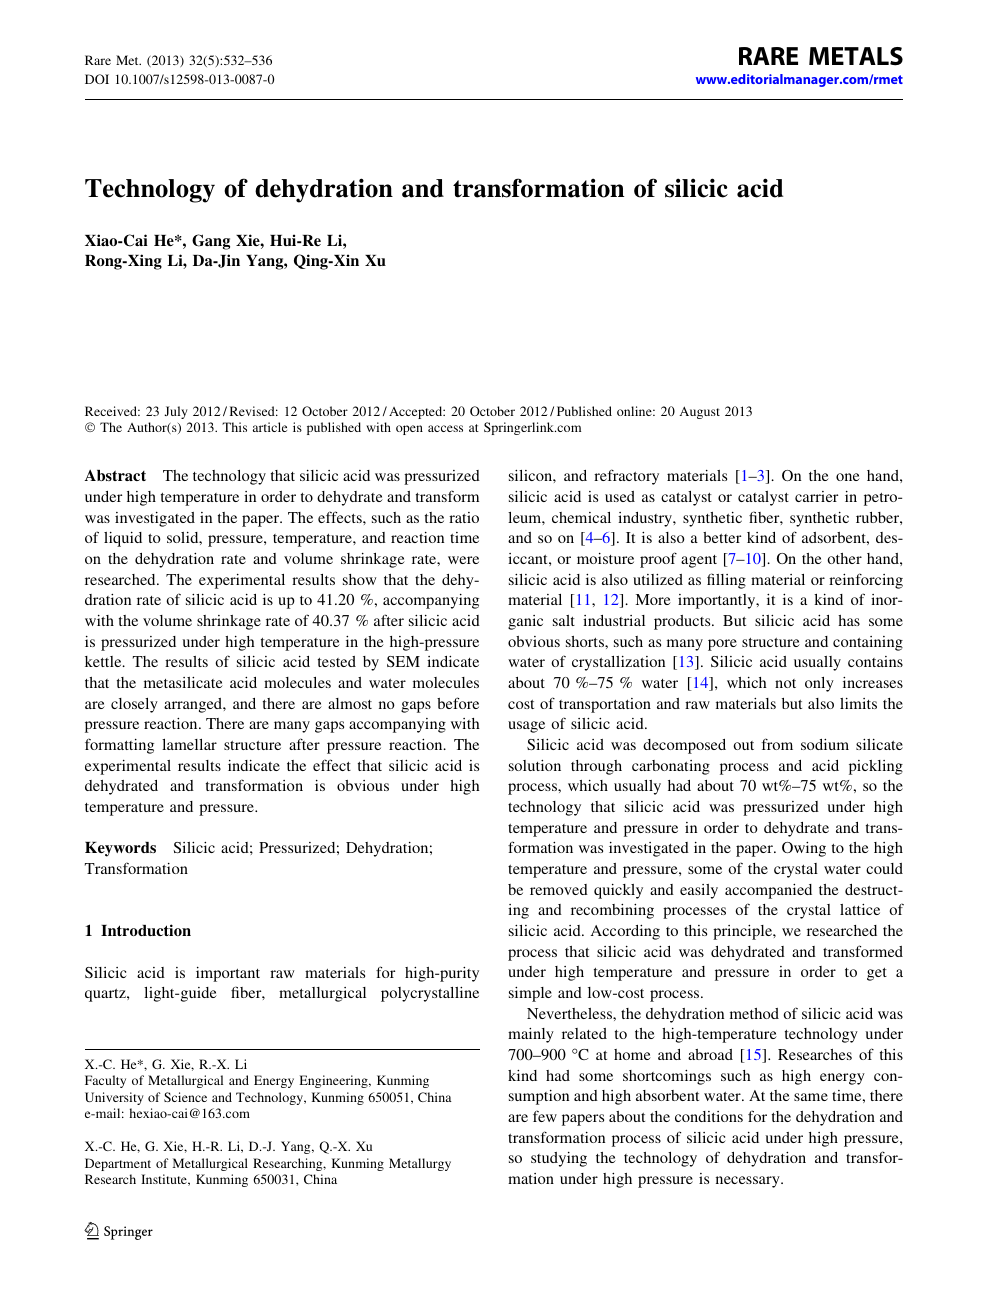 Technology Of Dehydration And Transformation Of Silicic Acid Topic Of Research Paper In Materials Engineering Download Scholarly Article Pdf And Read For Free On Cyberleninka Open Science Hub